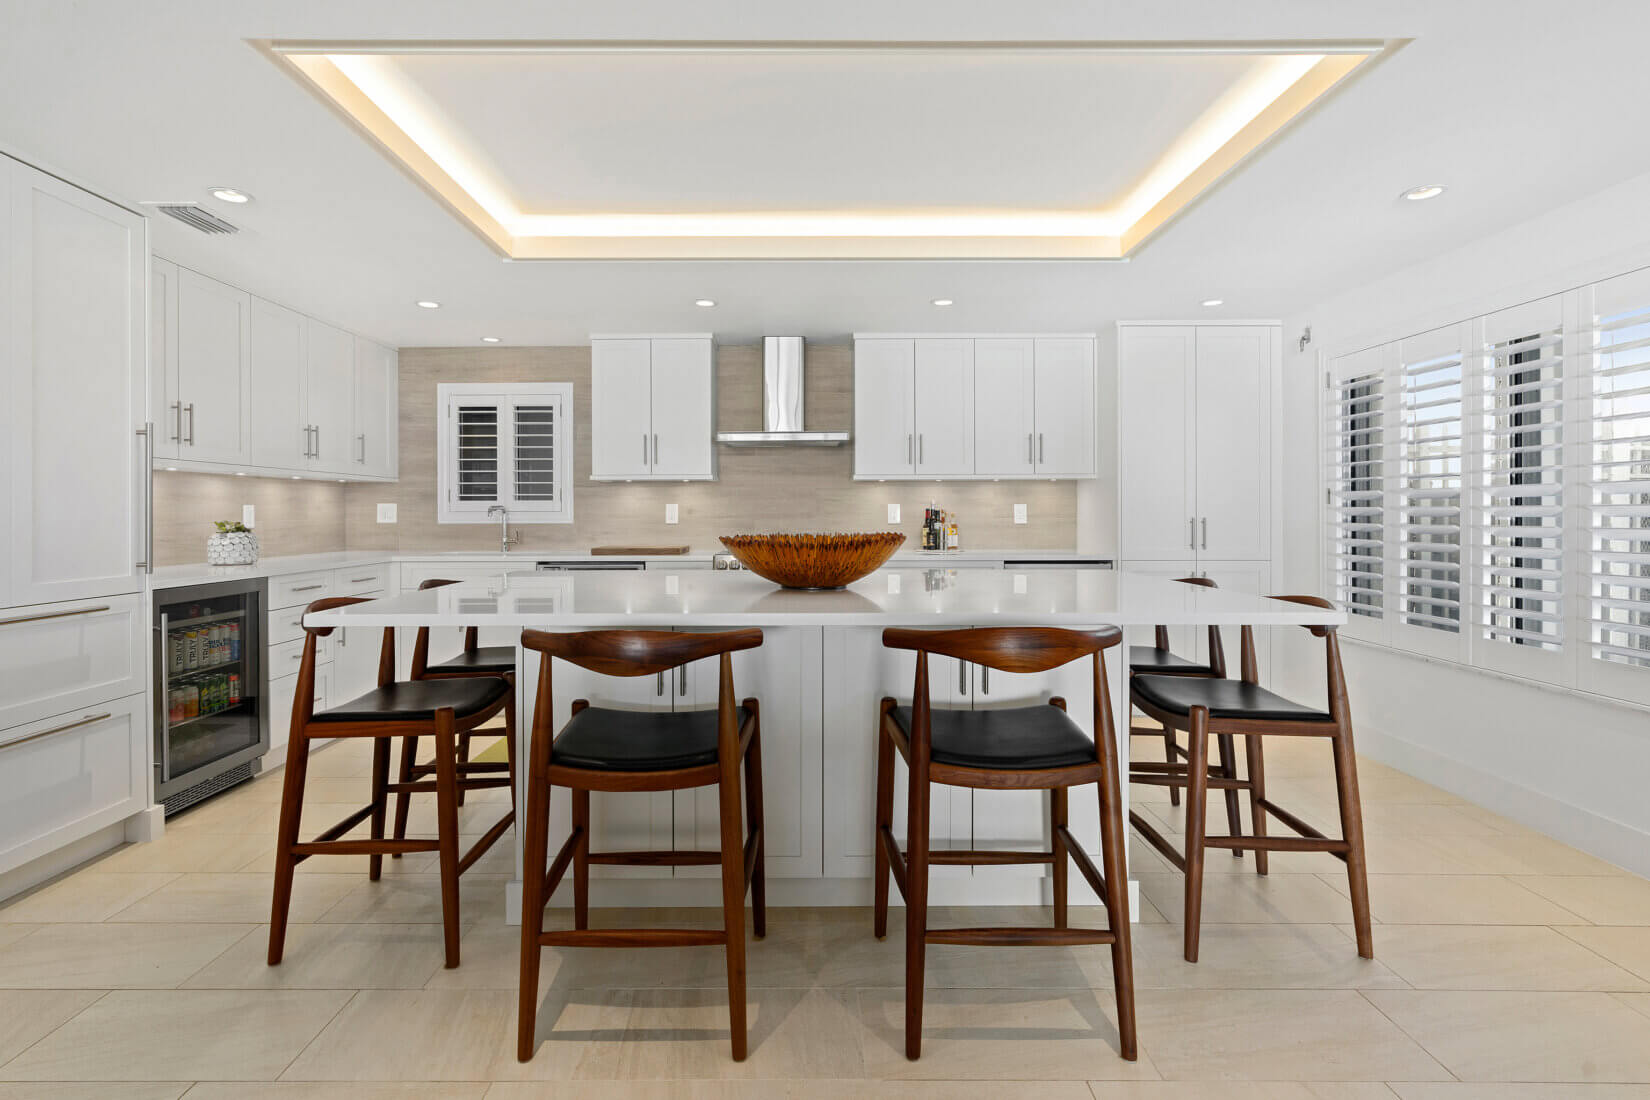 Sleek white kitchen design with island and surrounding seating